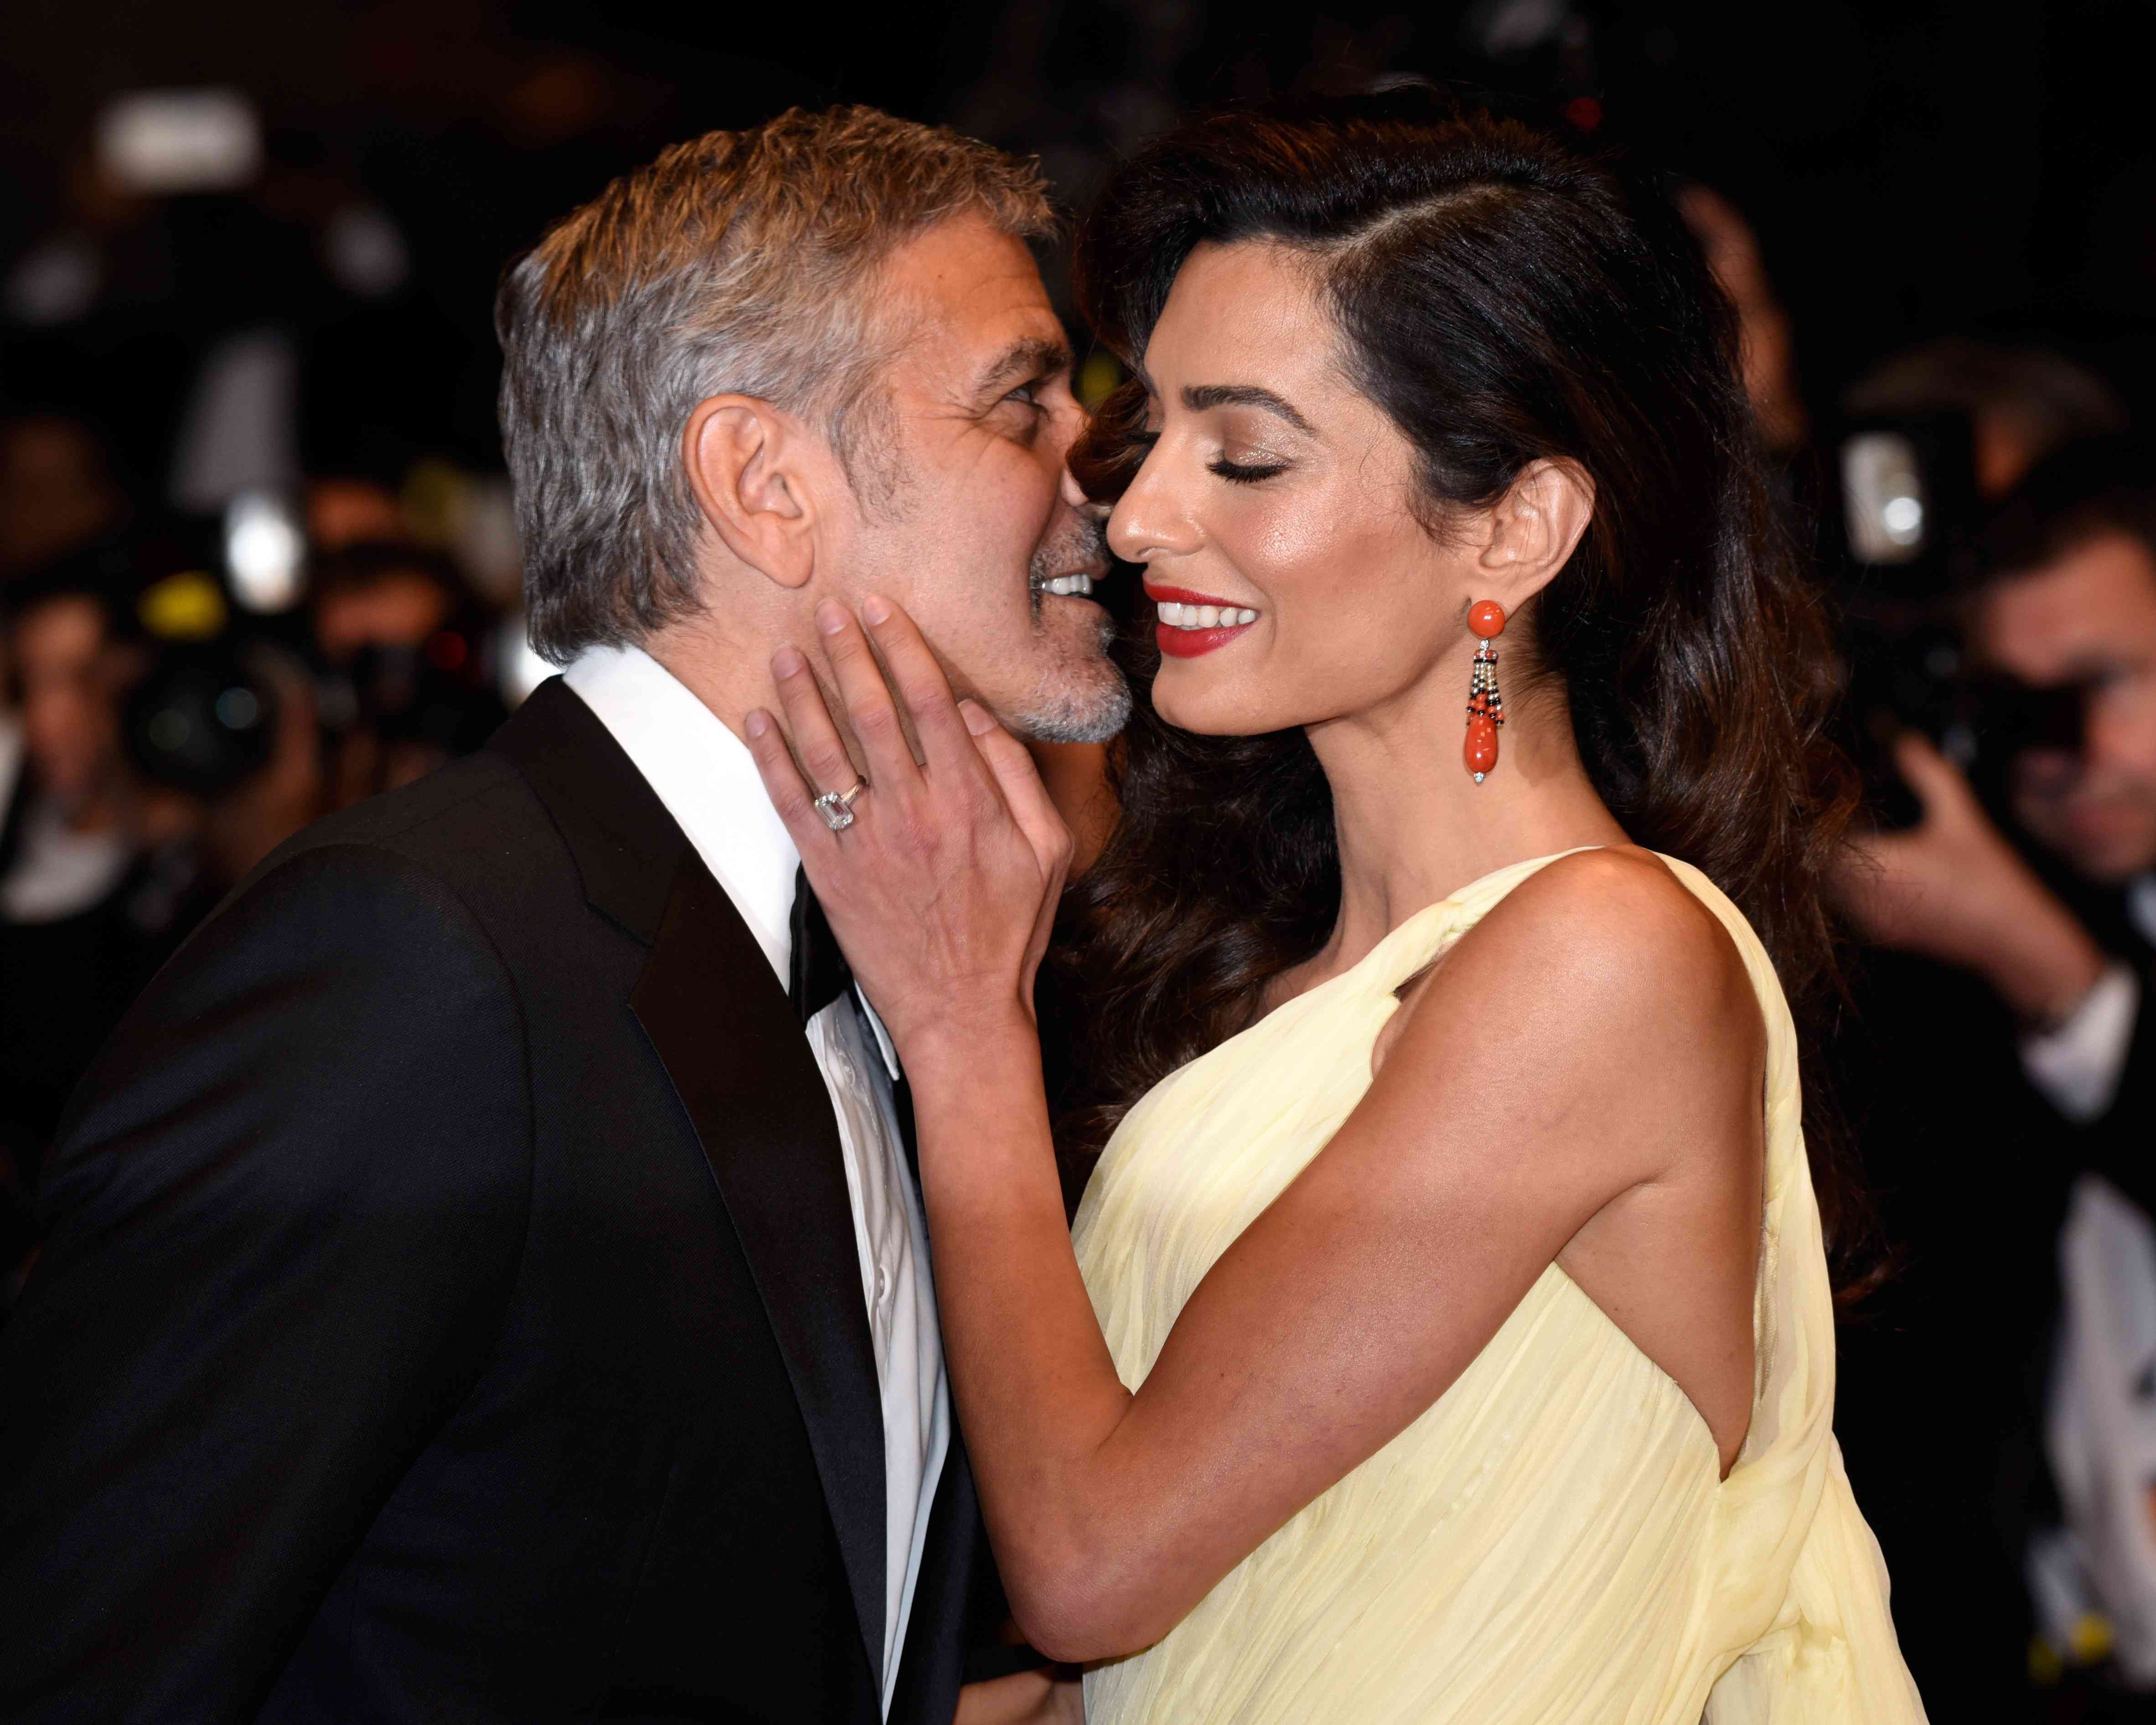 A Full Timeline of George and Amal Clooney's Fairytale Relationship